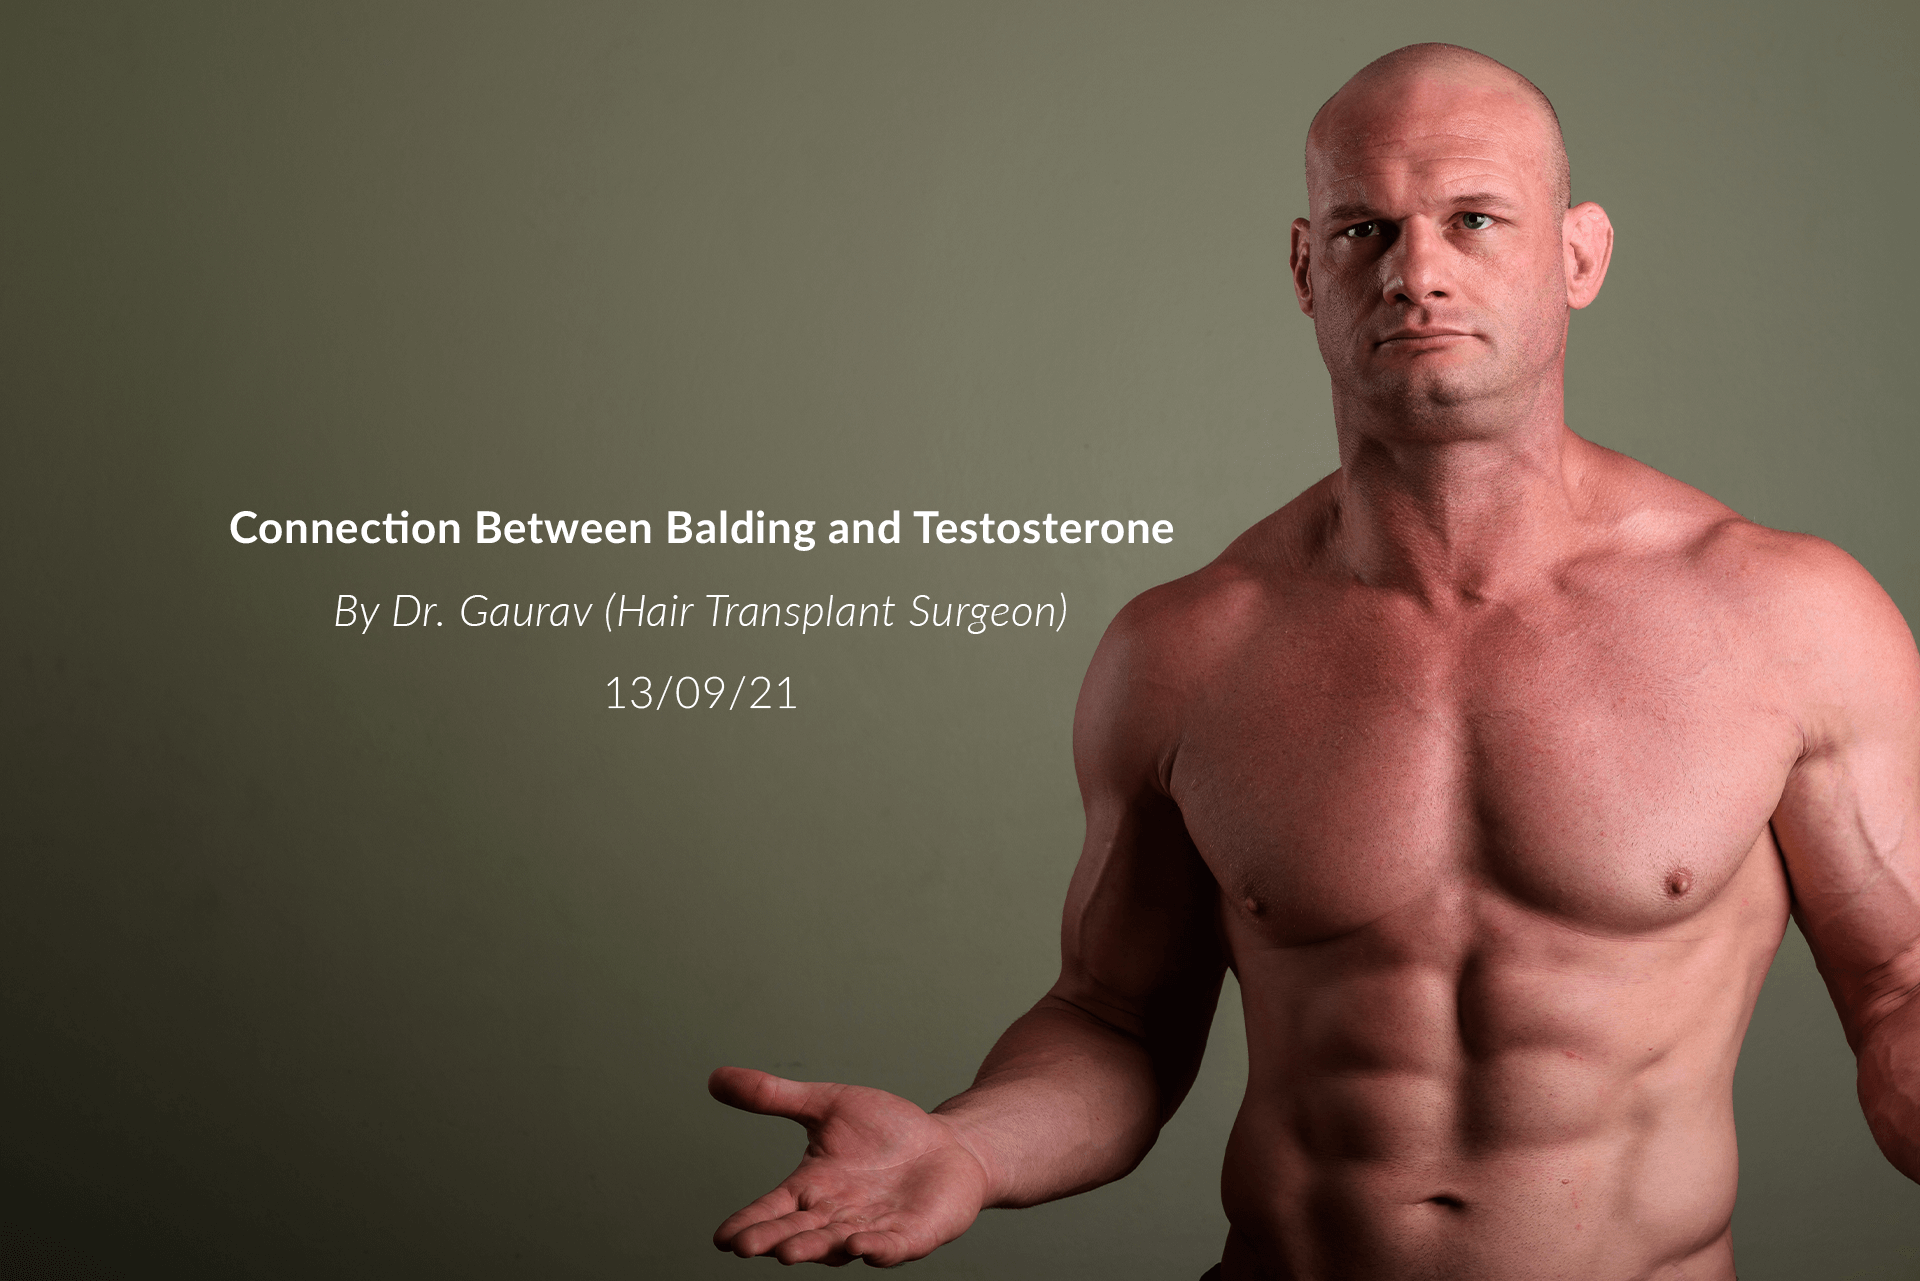 Connection Between Balding and Testosterone